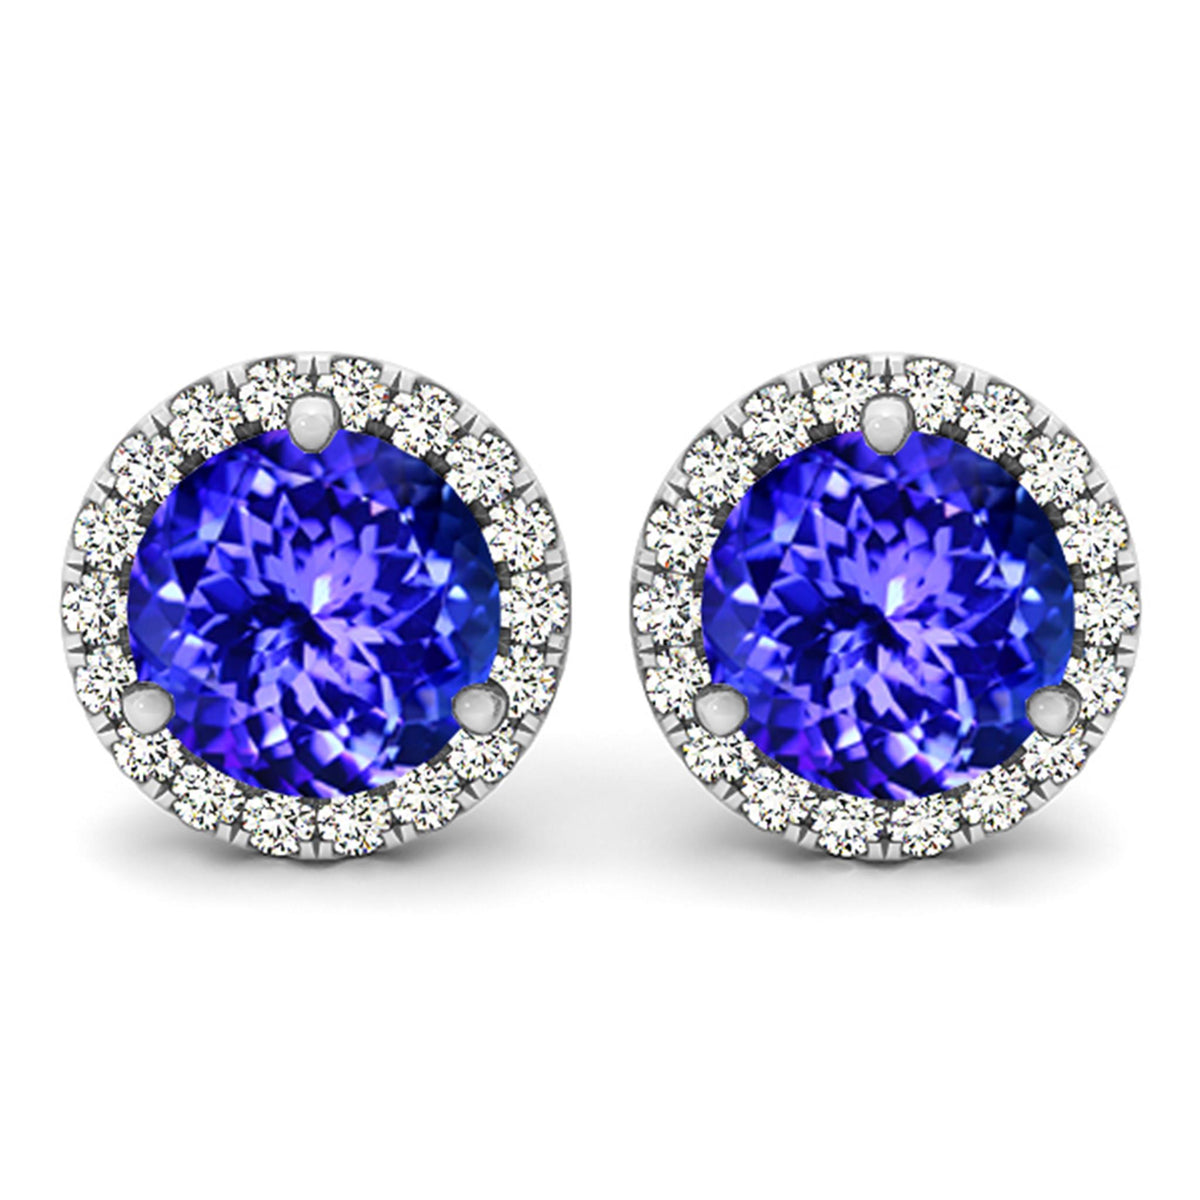 18Kt White Gold Halo Earrings Gemstone Earrings With 1.80ct Tanzanites